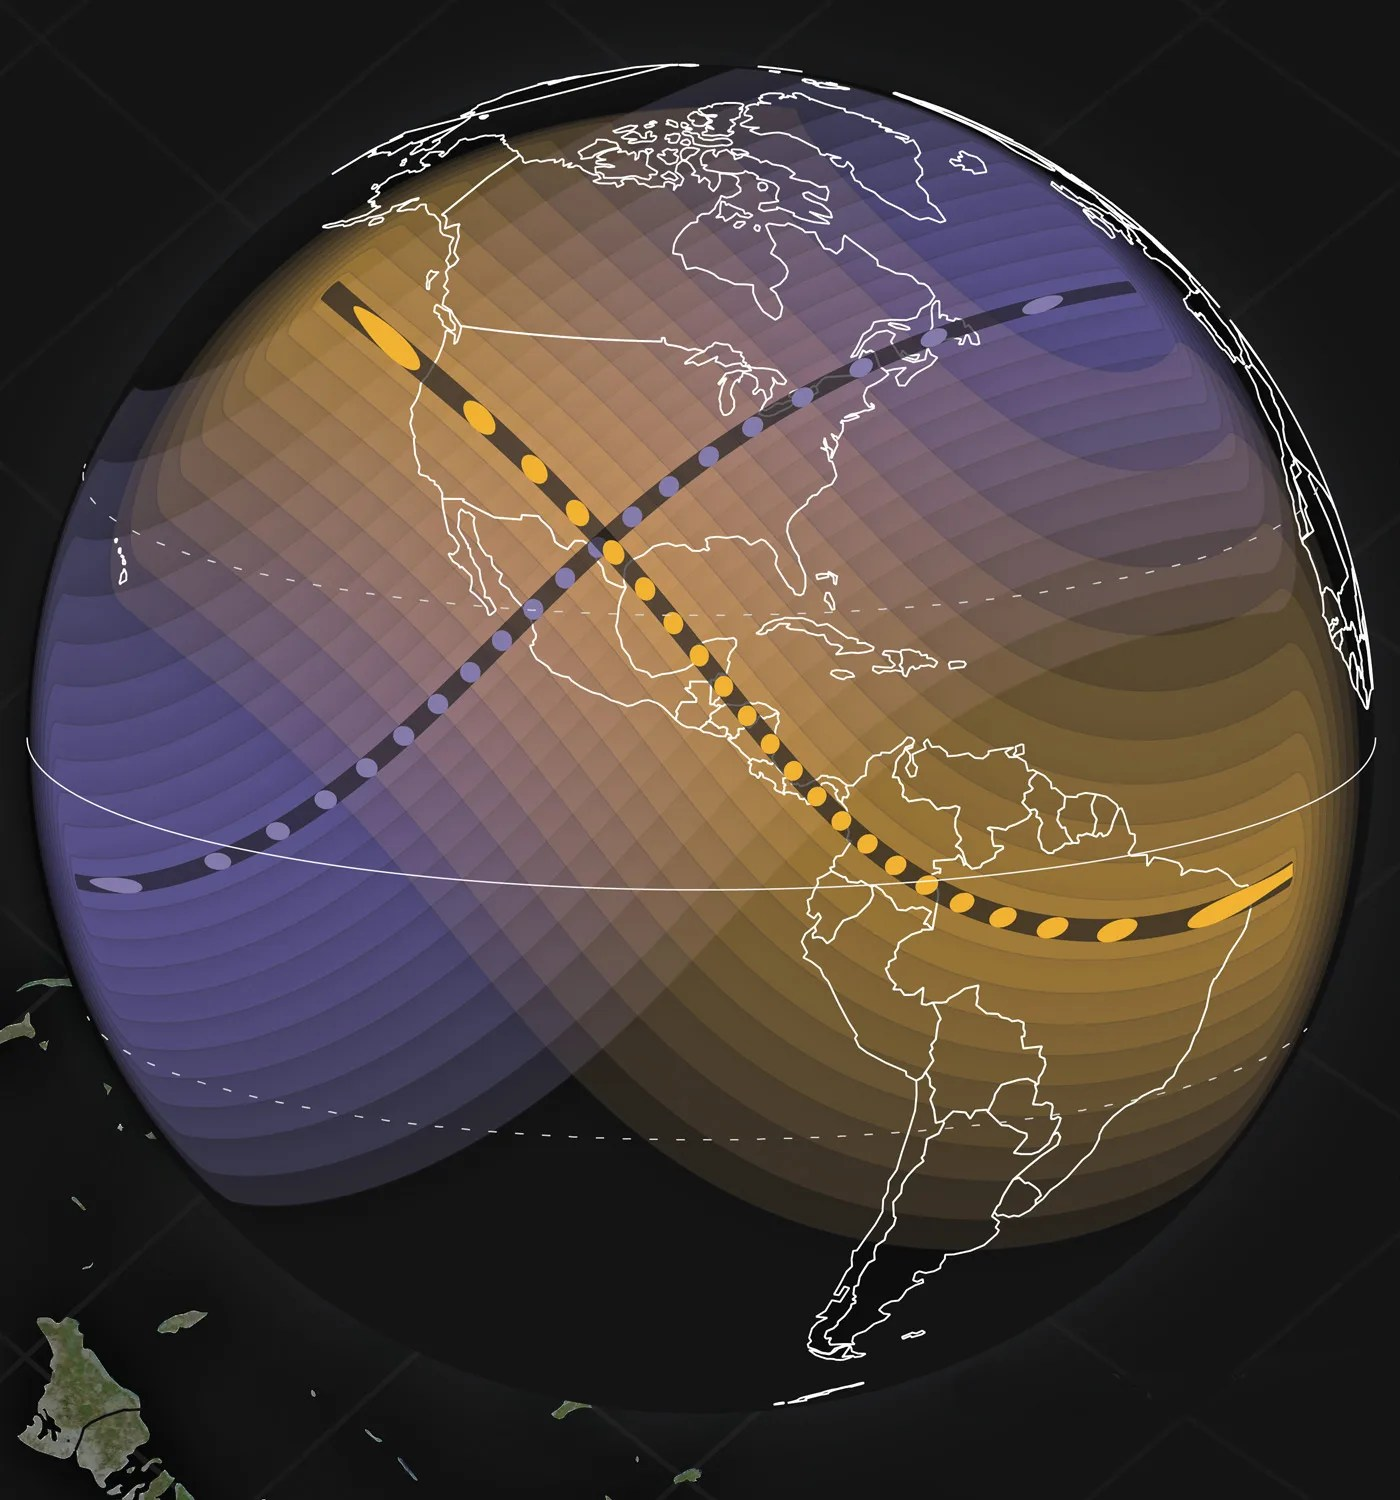 Illustrated globe showing the path of both the lunar and solar eclipses in 2023 and 2024,